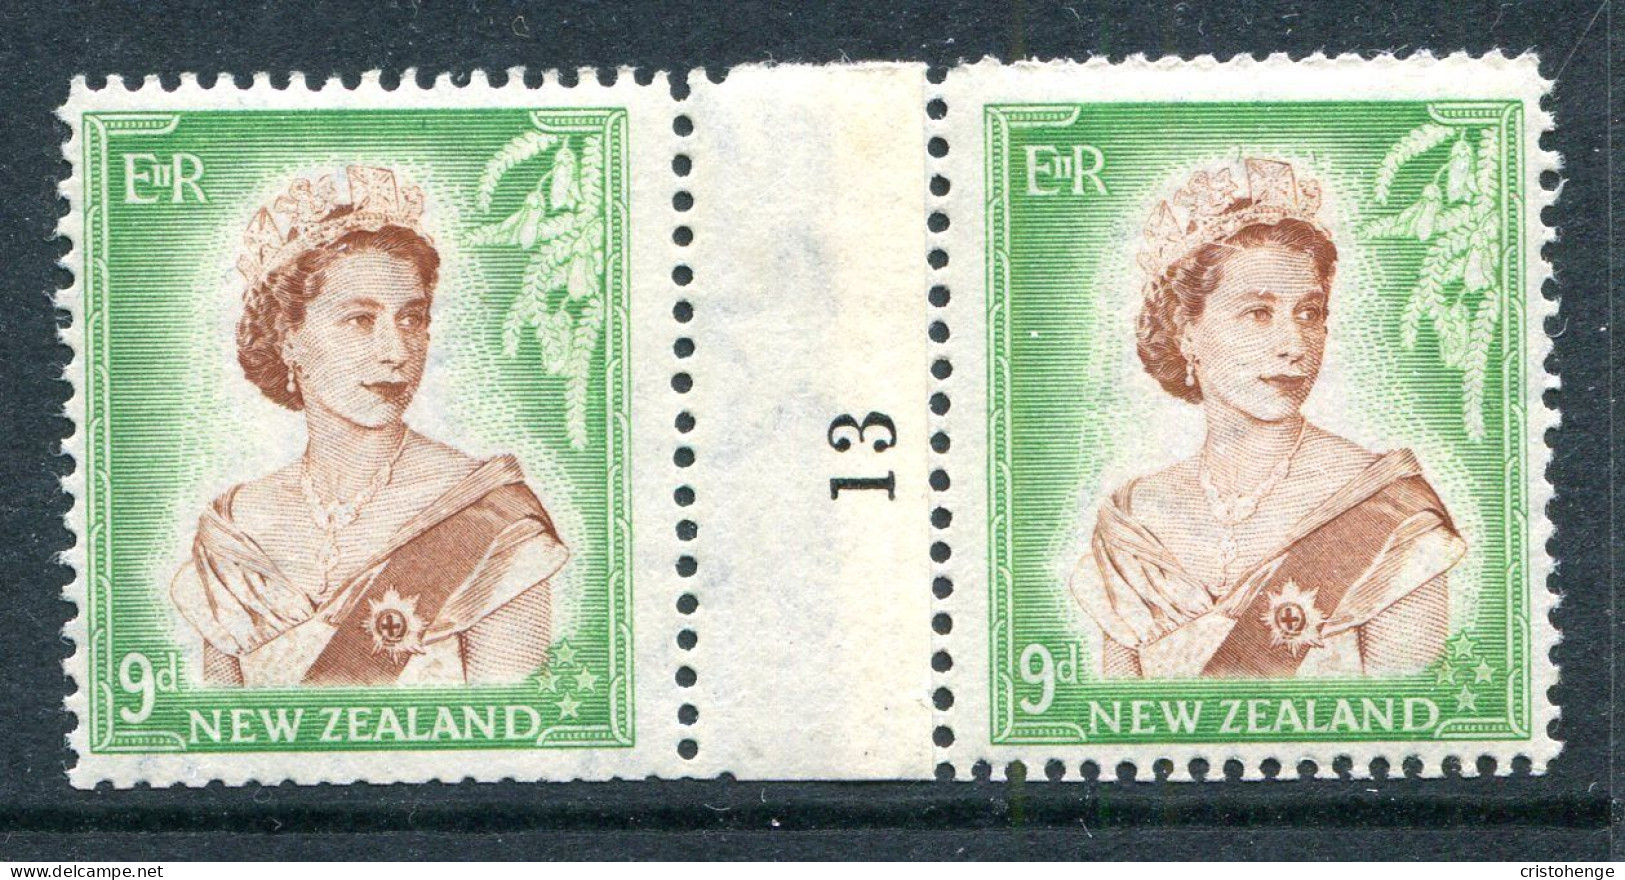 New Zealand 1953-59 QEII Definitives - Coil Pairs - 9d Brown & Green - Horizontal - No. 13 - LHM - Nuevos